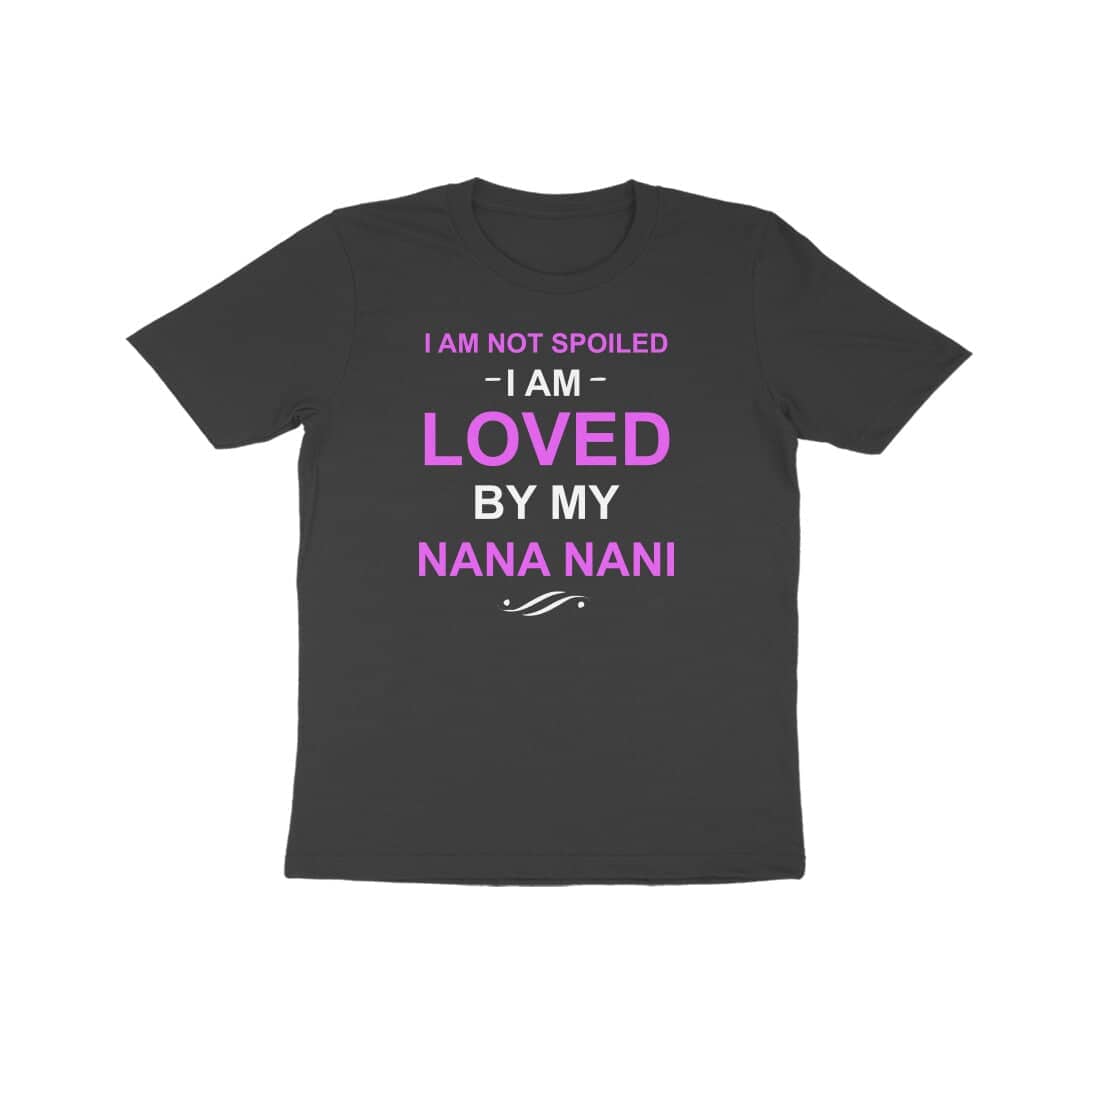 Blessed and Loved By Nana Nani Exclusive Double Printed T Shirt for Kids Printrove Black 8 